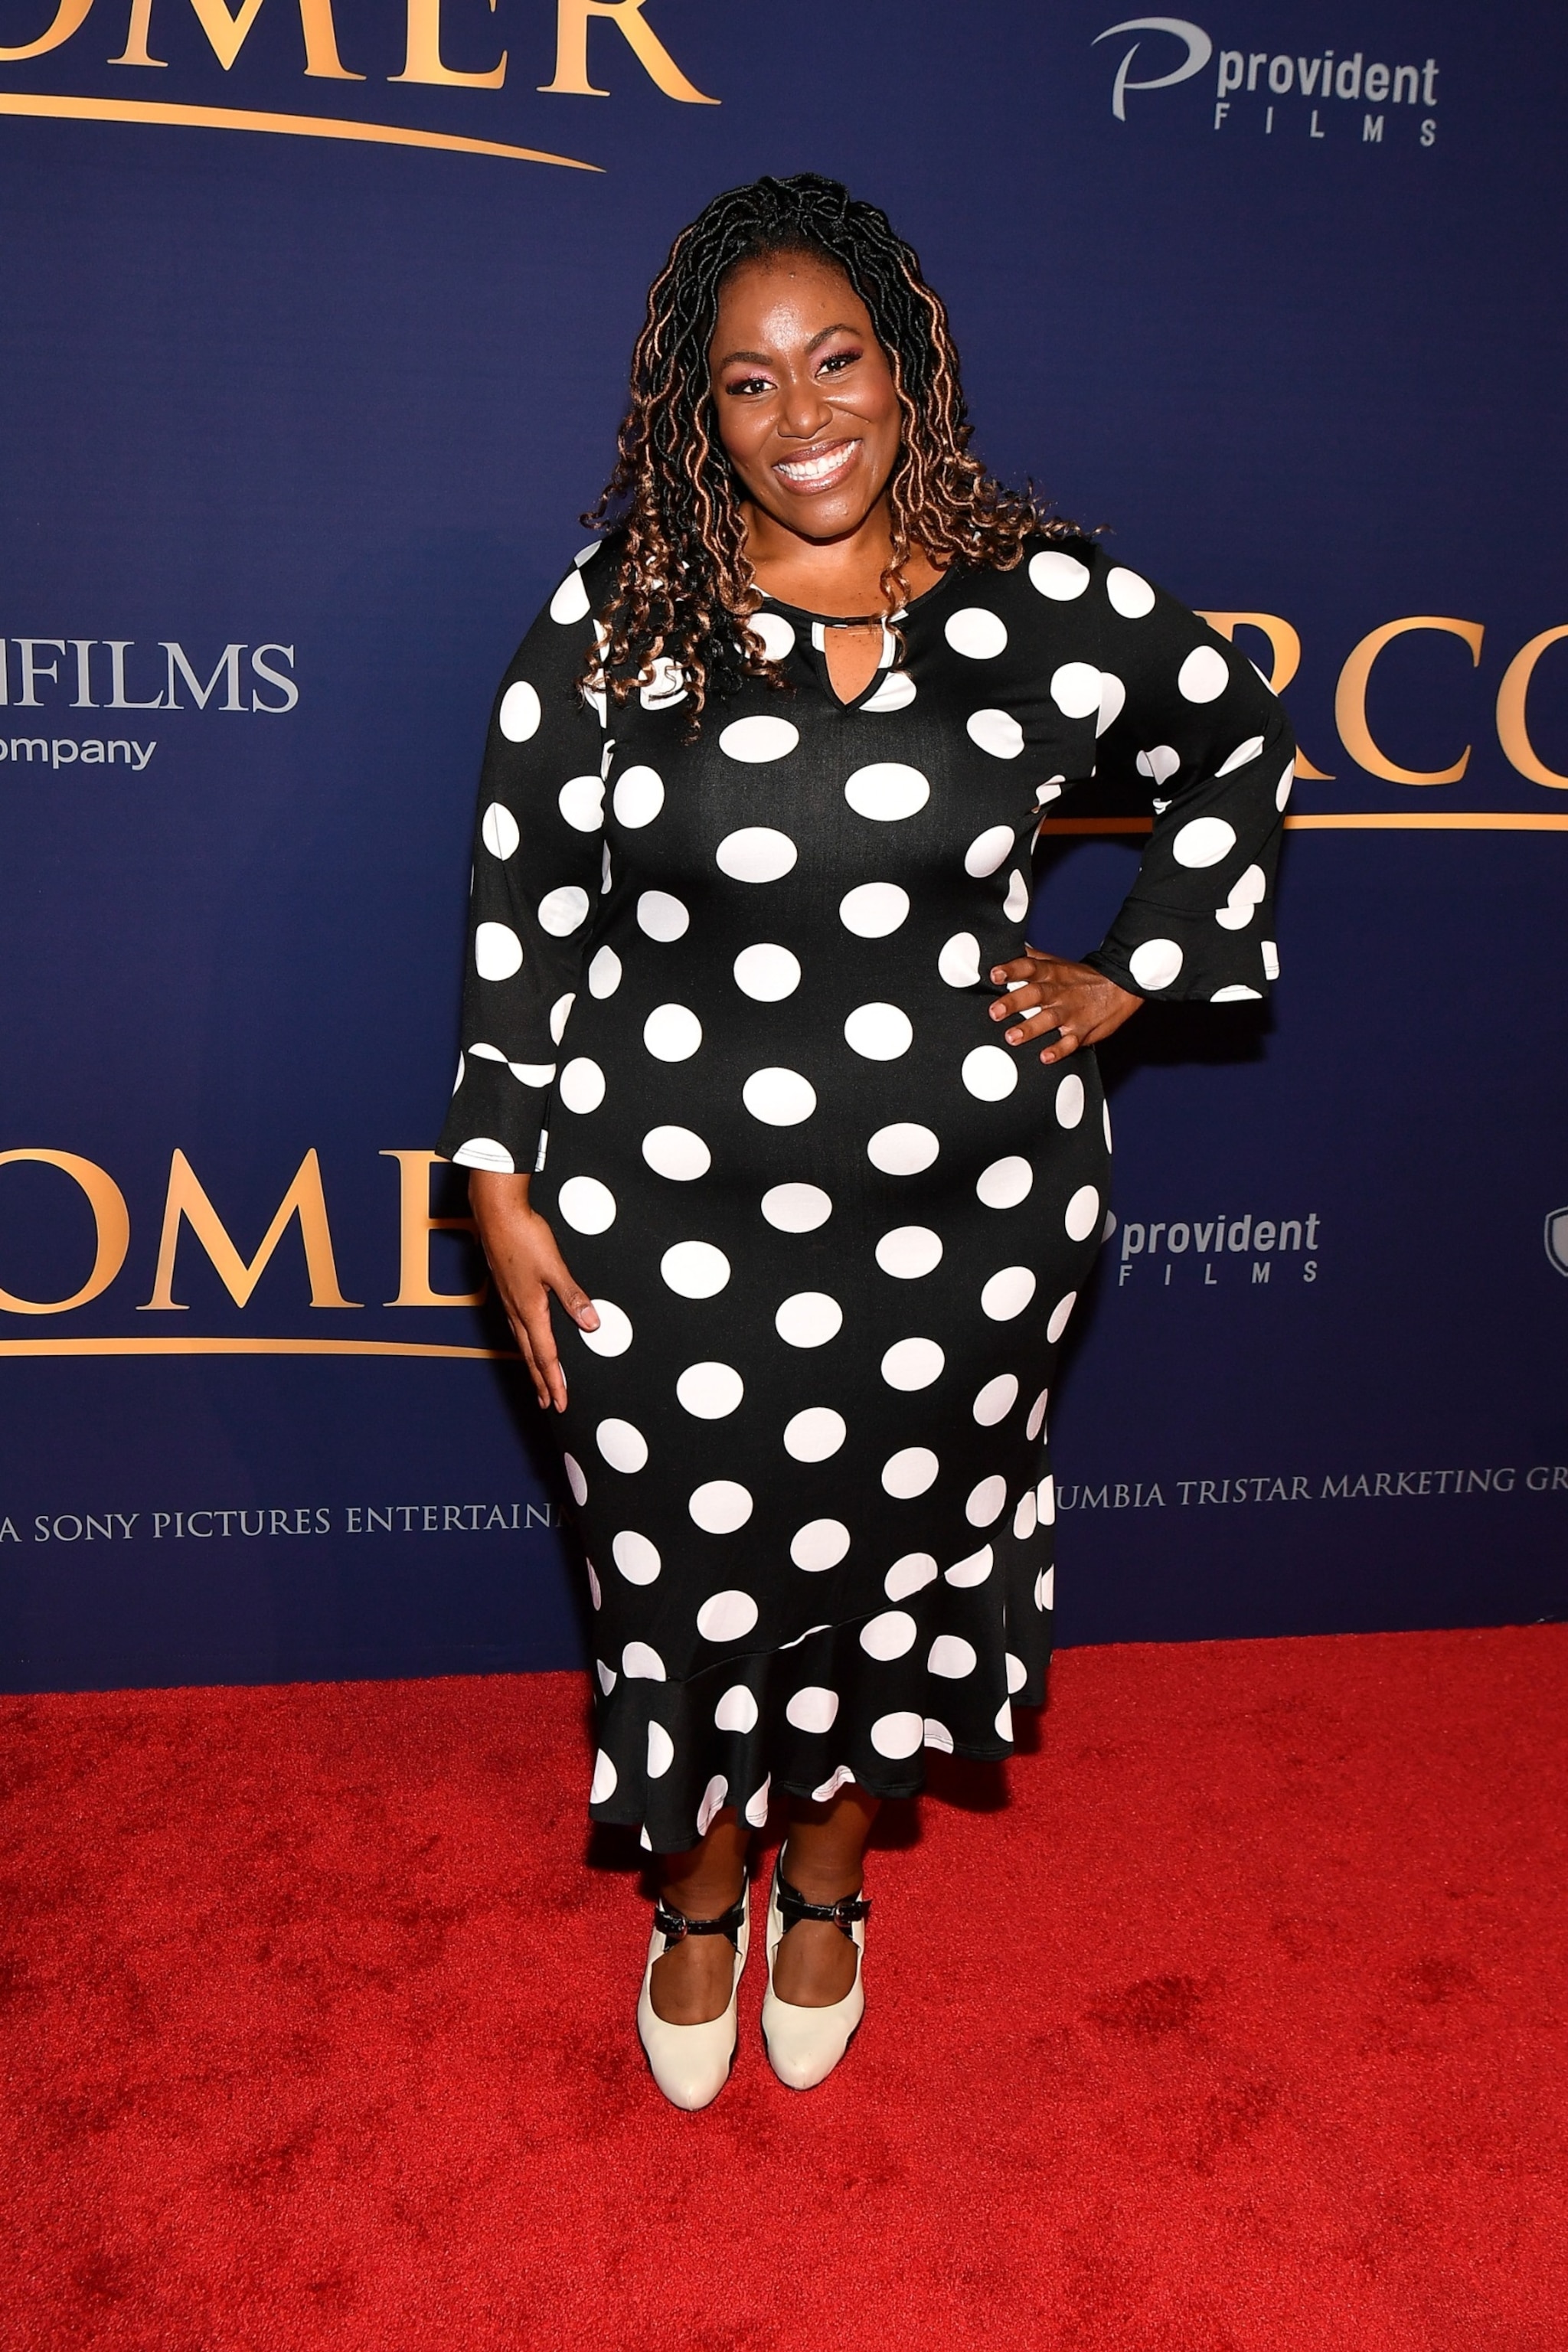 PHOTO: Mandisa attends the premiere of "Overcomer" at The Woodruff Arts Center & Symphony Hall on Aug. 15, 2019 in Atlanta.